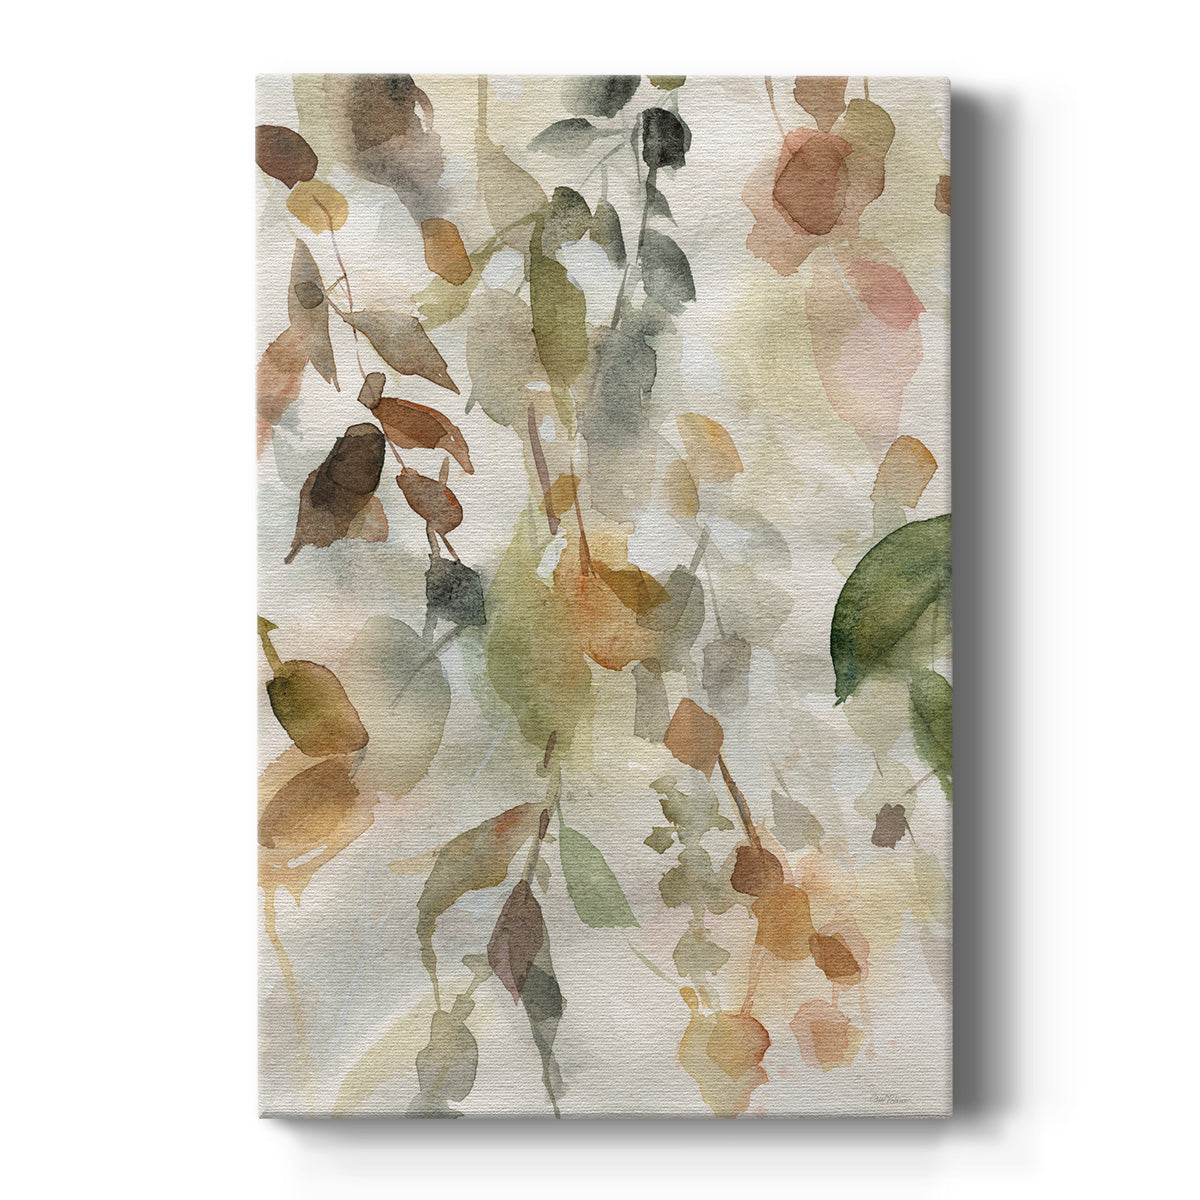 Cascading Nature II Premium Gallery Wrapped Canvas - Ready to Hang